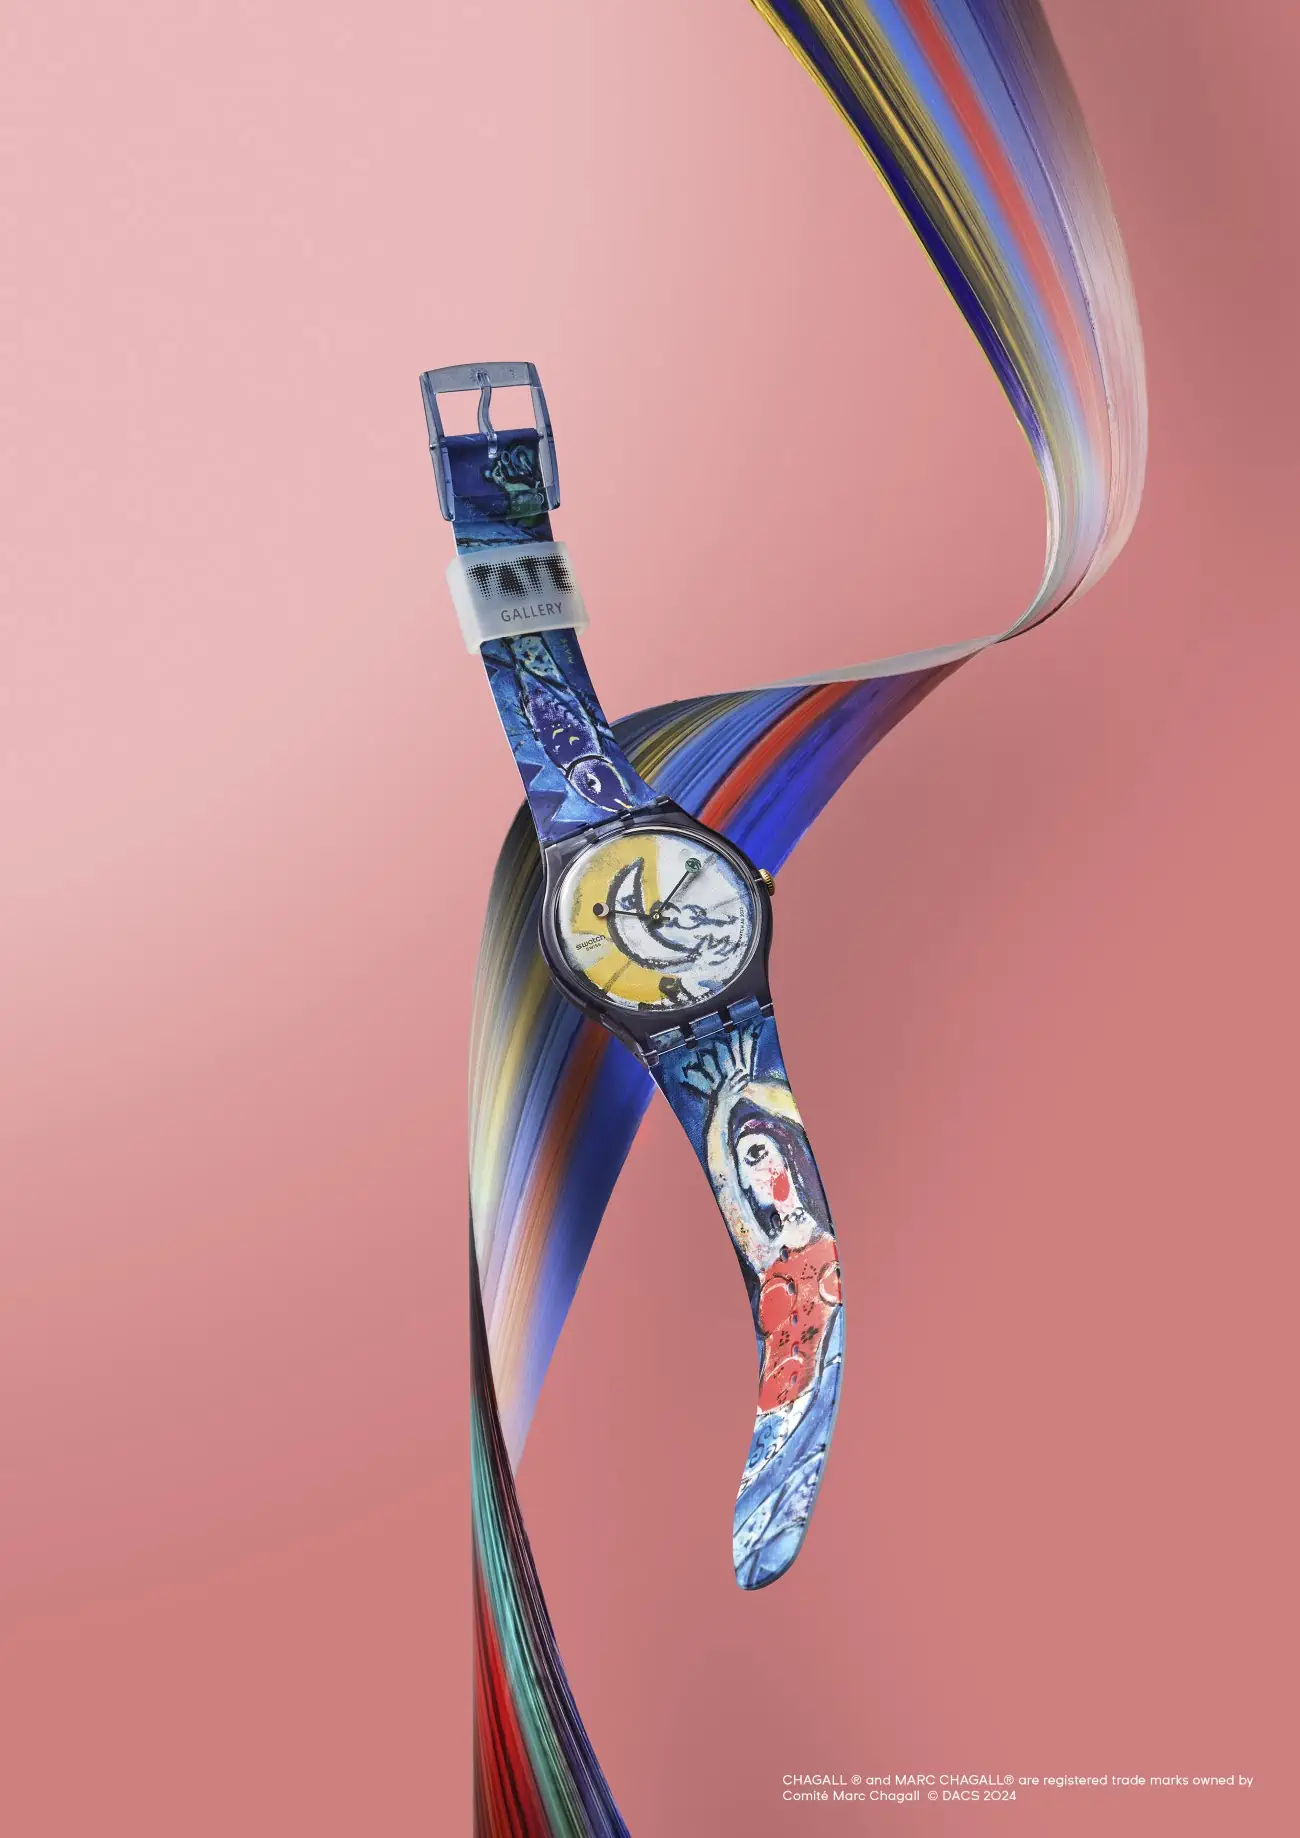 Swatch x Tate Gallery: A collaboration of art and watchmaking